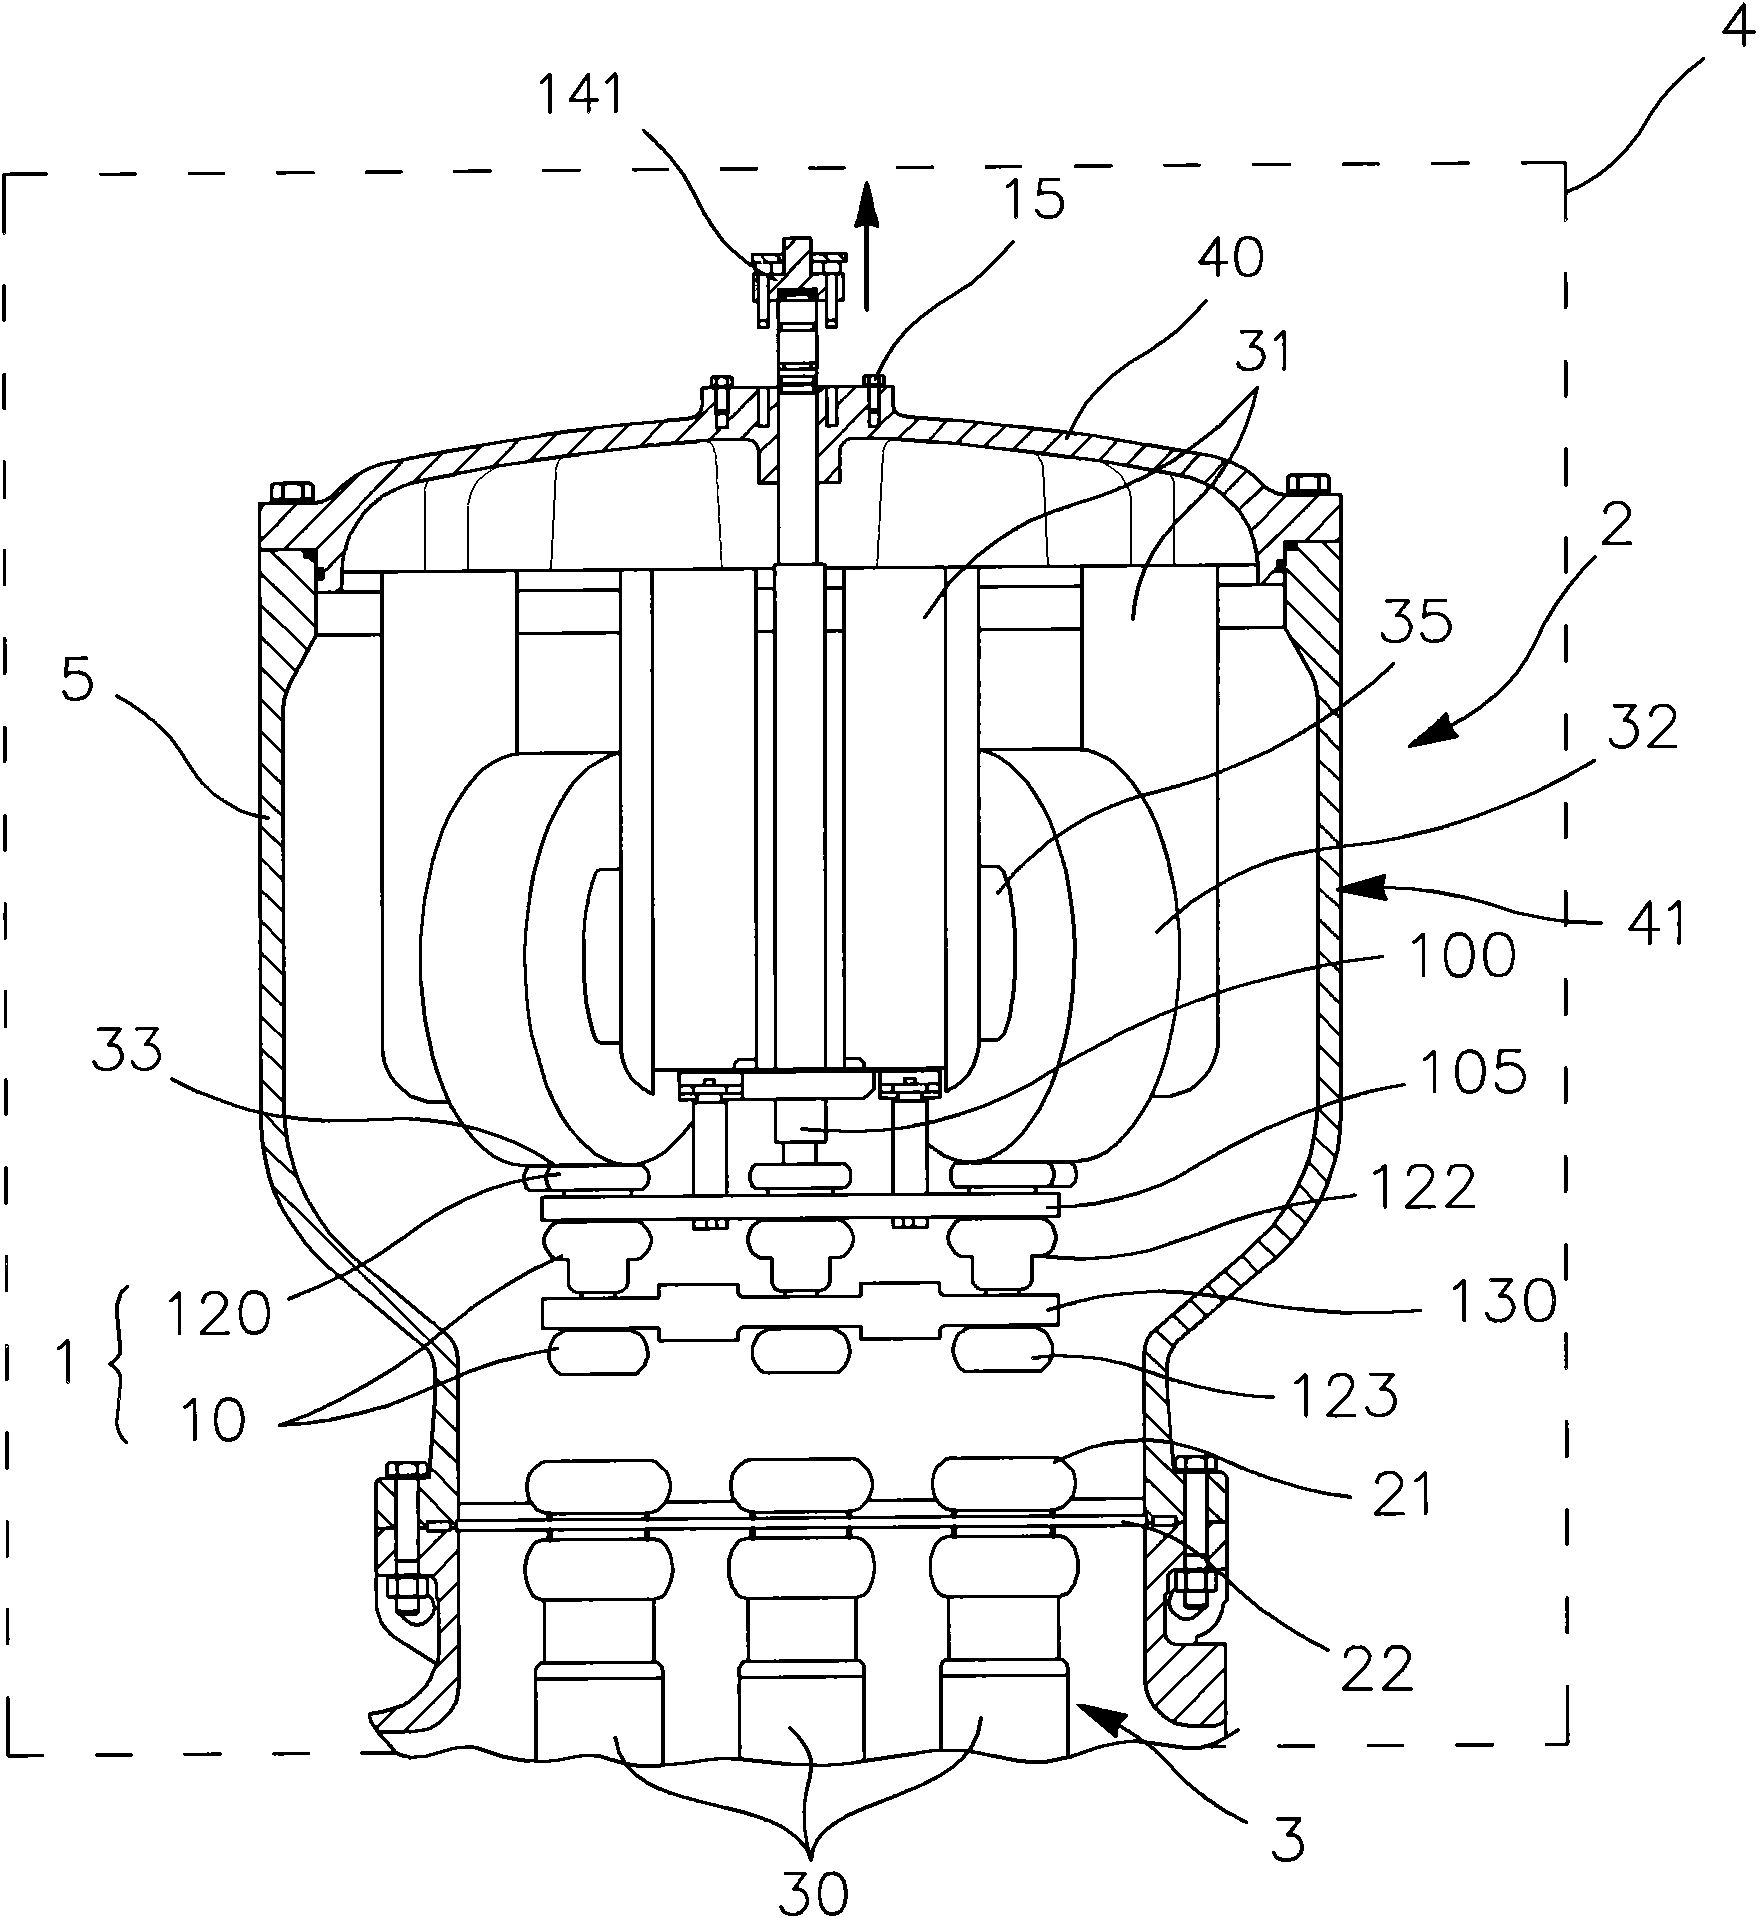 Cut-off device for separating or connecting two parts of an electric circuit, including a voltage transformer